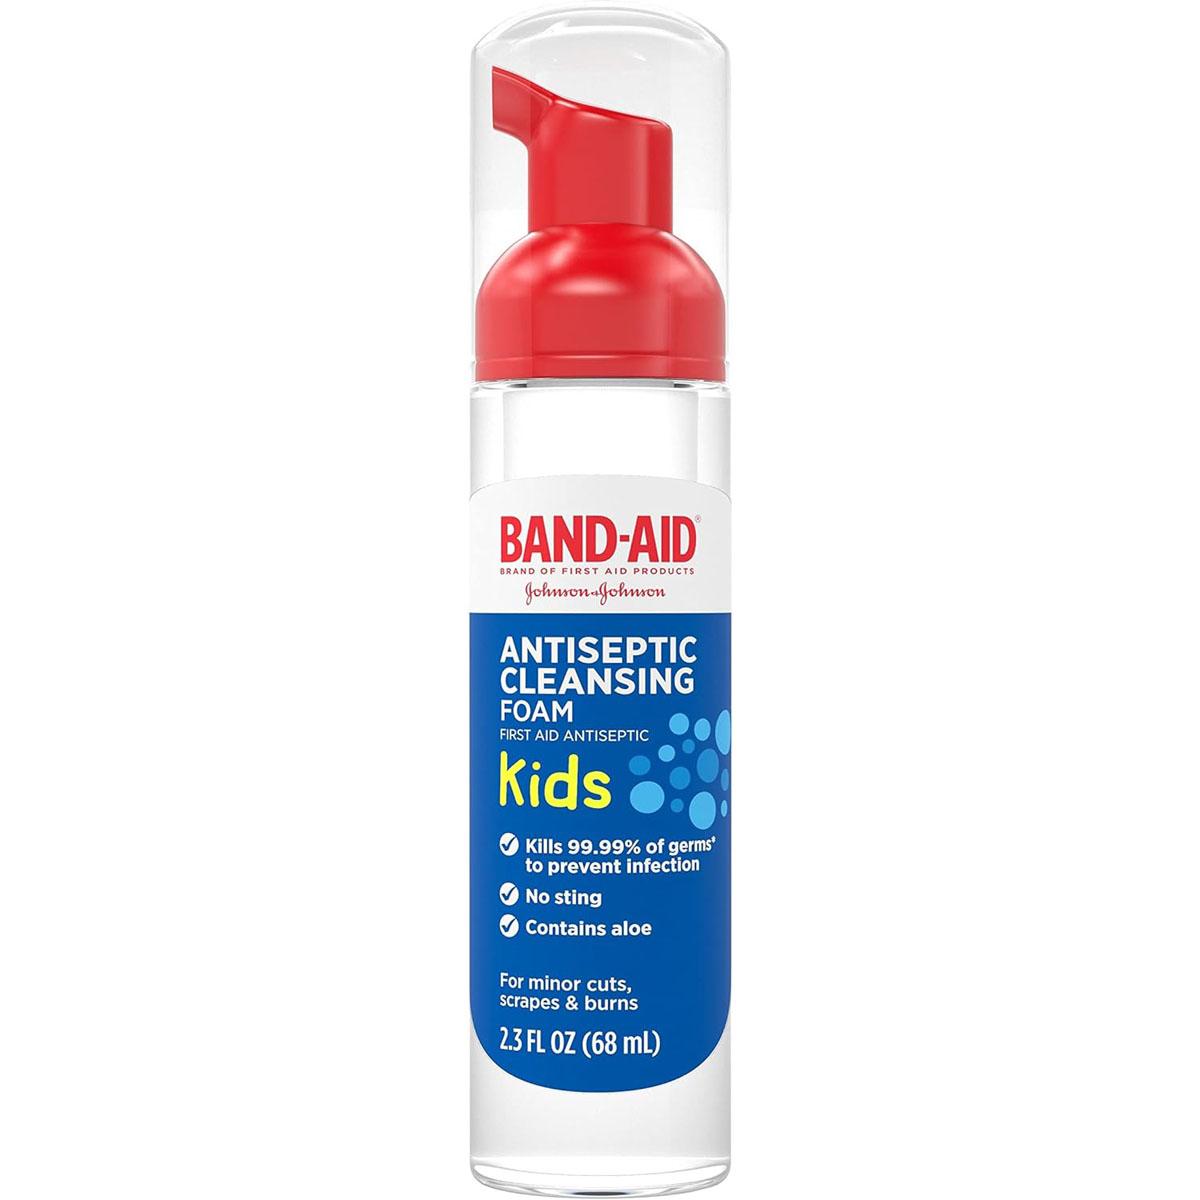 Band-Aid Brand First Aid Antiseptic Cleansing Foam for Kids for $2.79